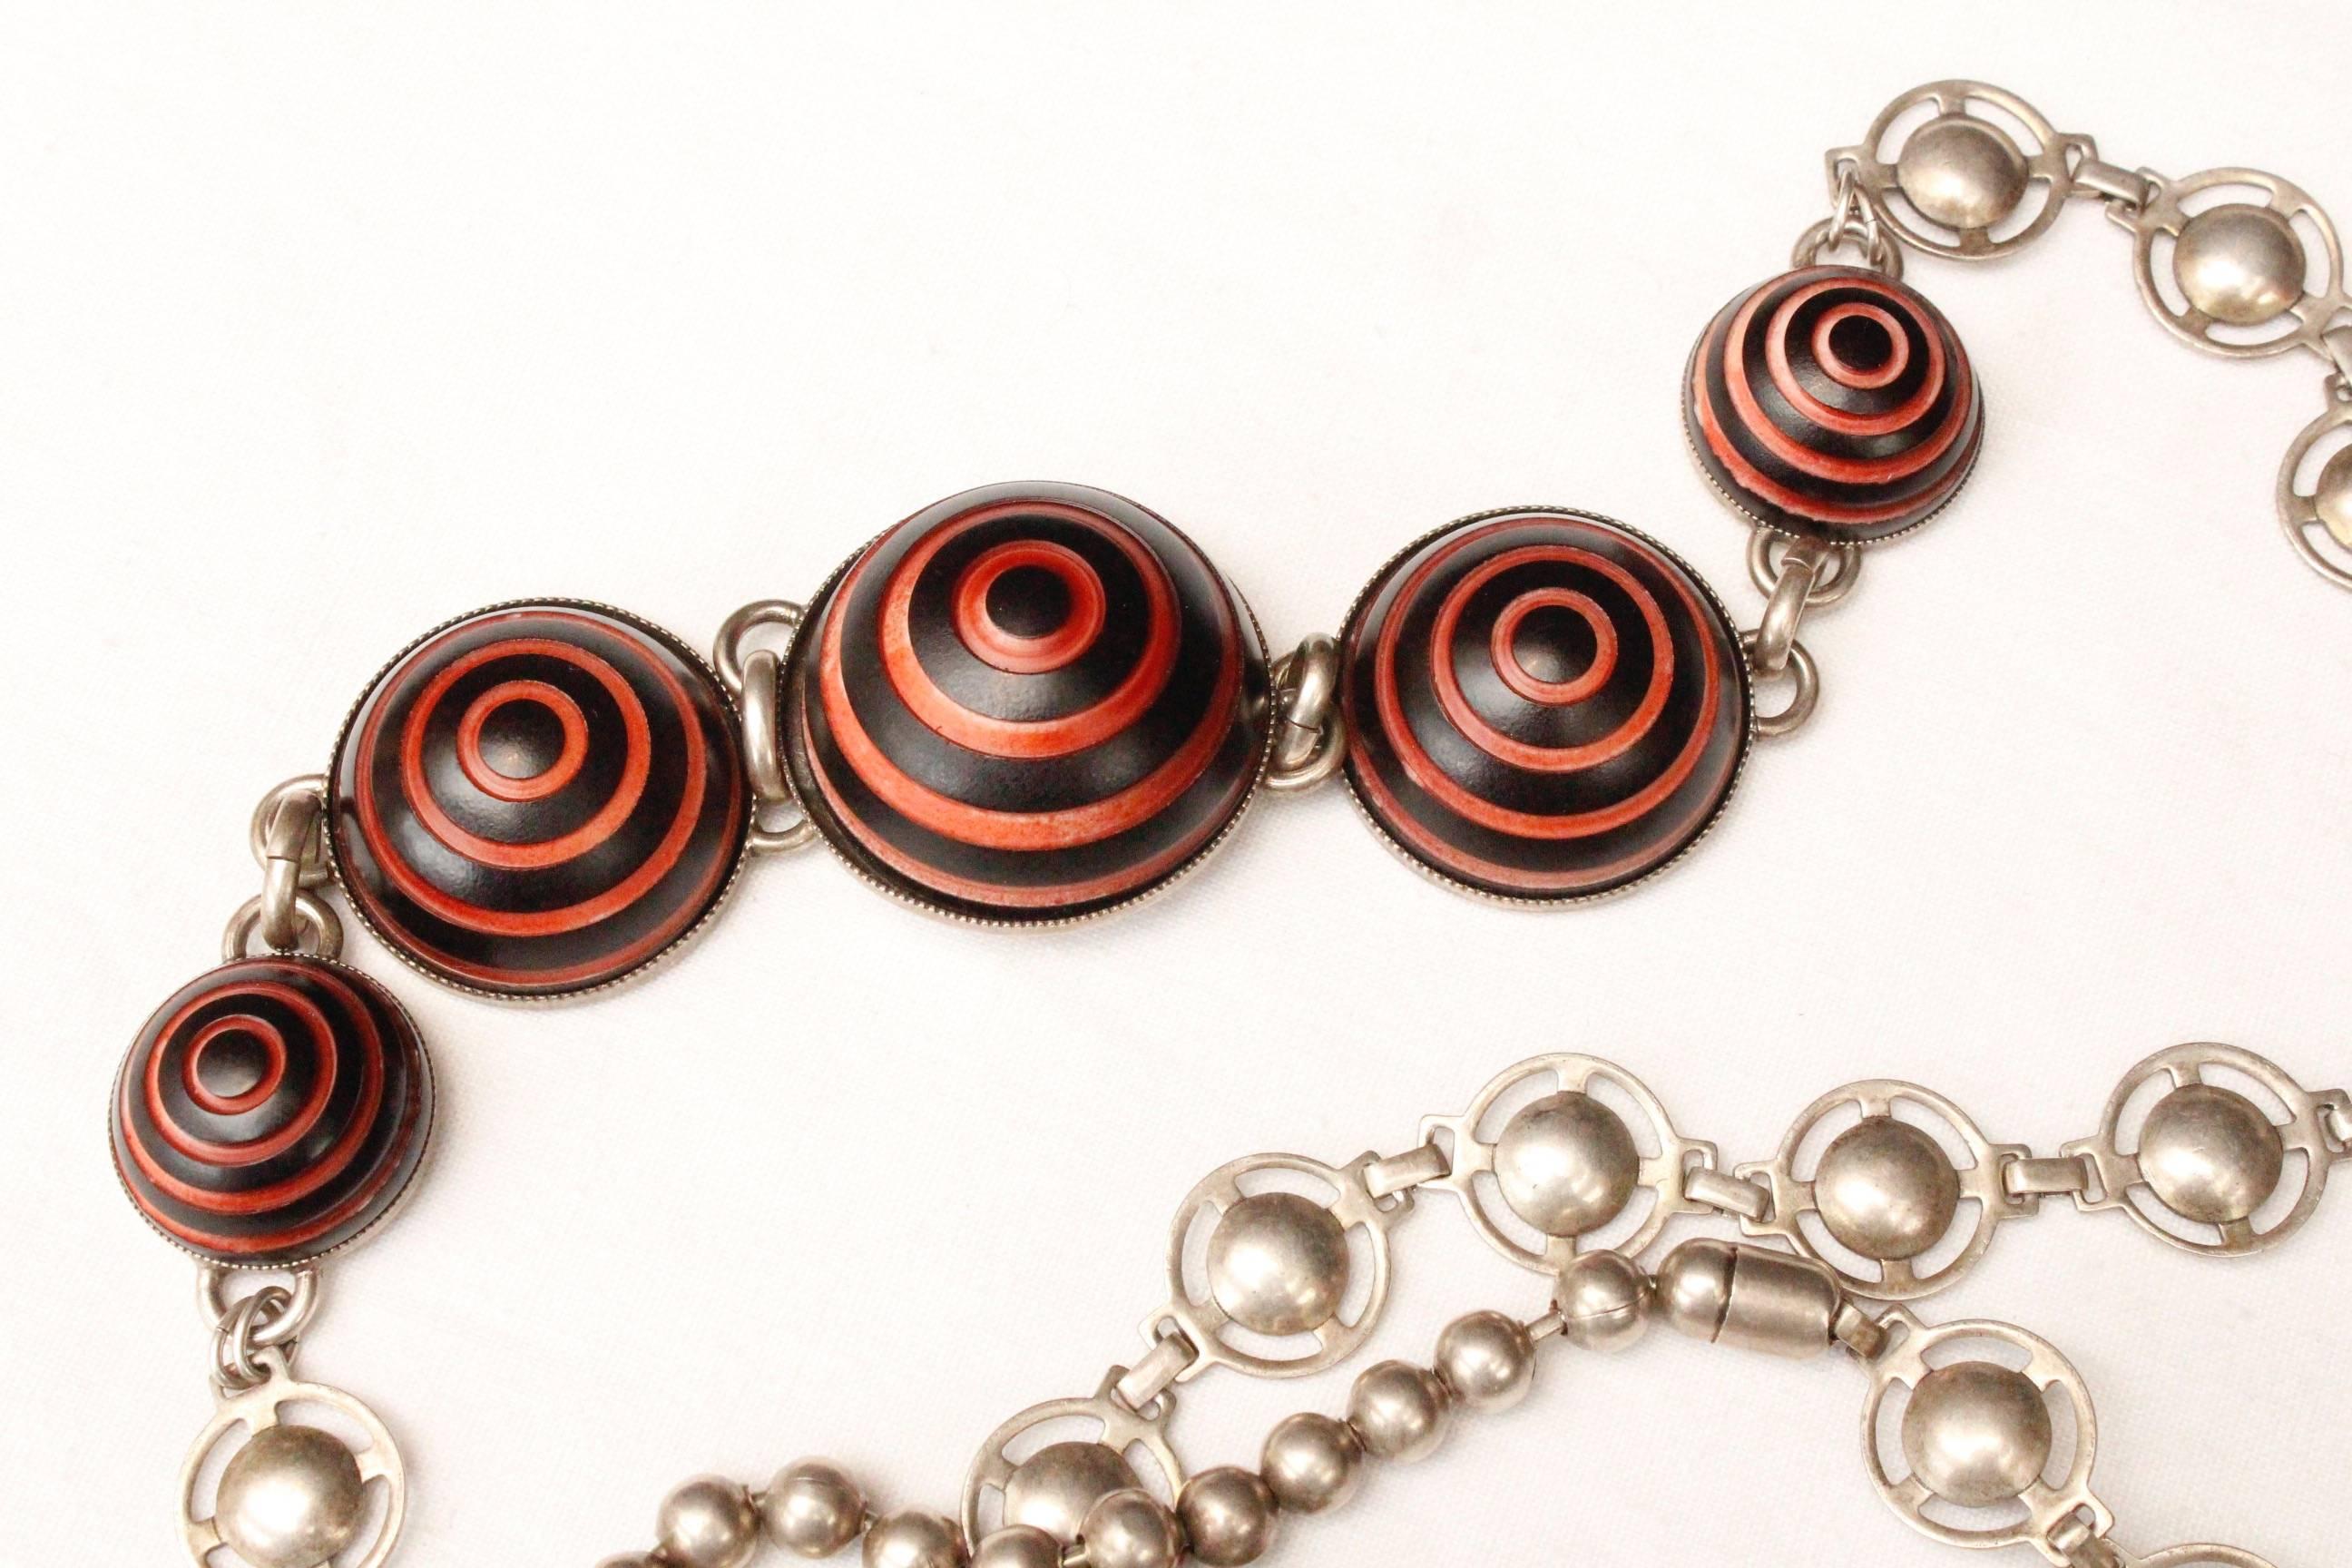 1990s, Jean-Paul Gaultier long tie-necklace with black and orange spheres For Sale 1